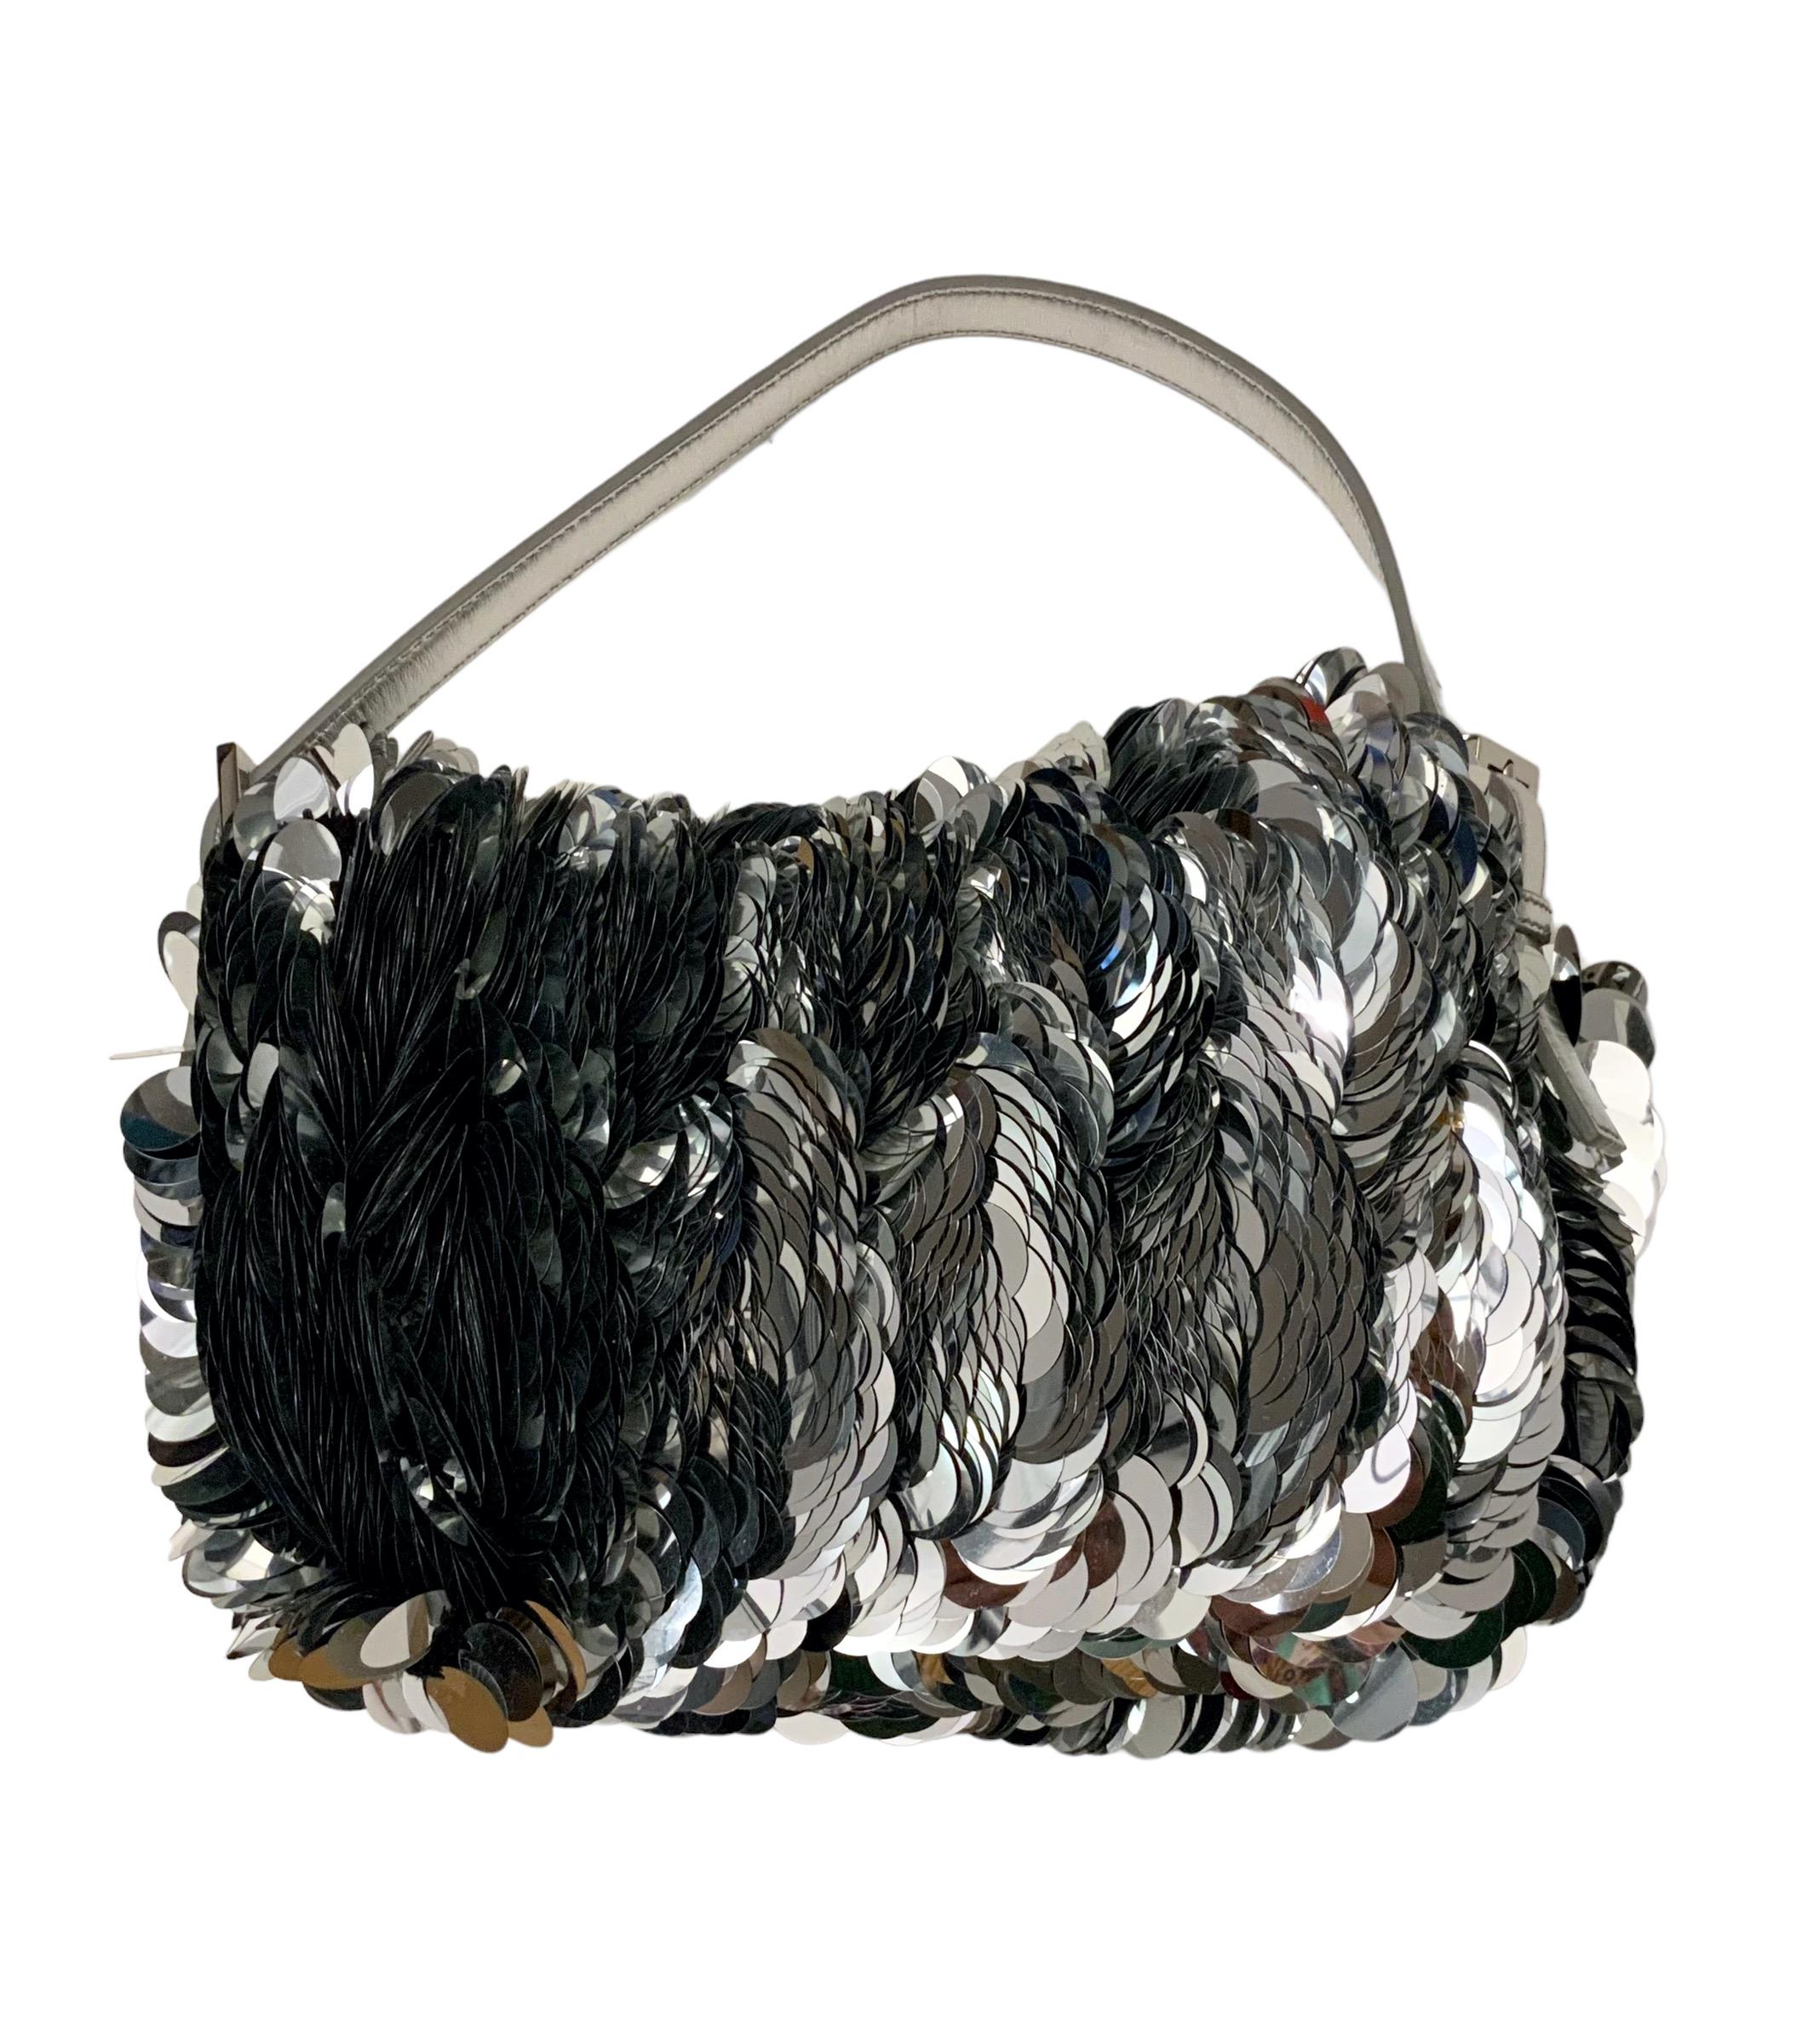 This pre-owned Baguette from the house of Fendi is an iconic piece !
Crafted of XXL silver paillette sequin on a black crochet knit bag base. 
It features a silver leather handle, a silver buckle with the Fendi emblem and a closure tab. 
Comes with